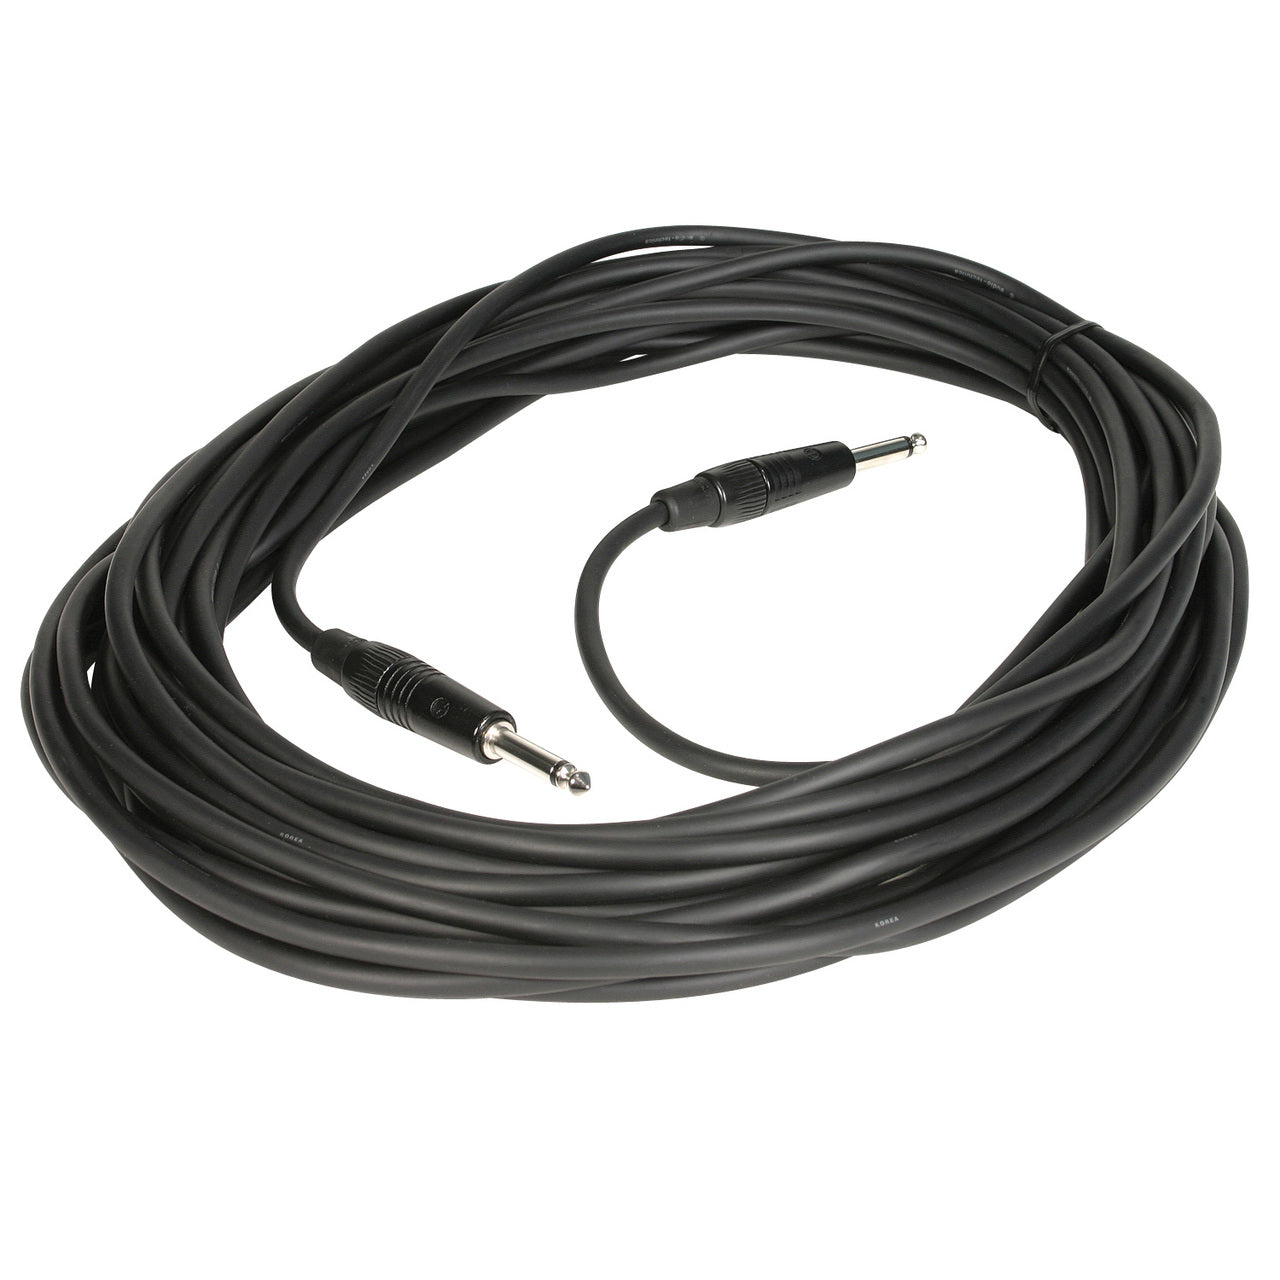 50-foot speaker cable for Voice Machine